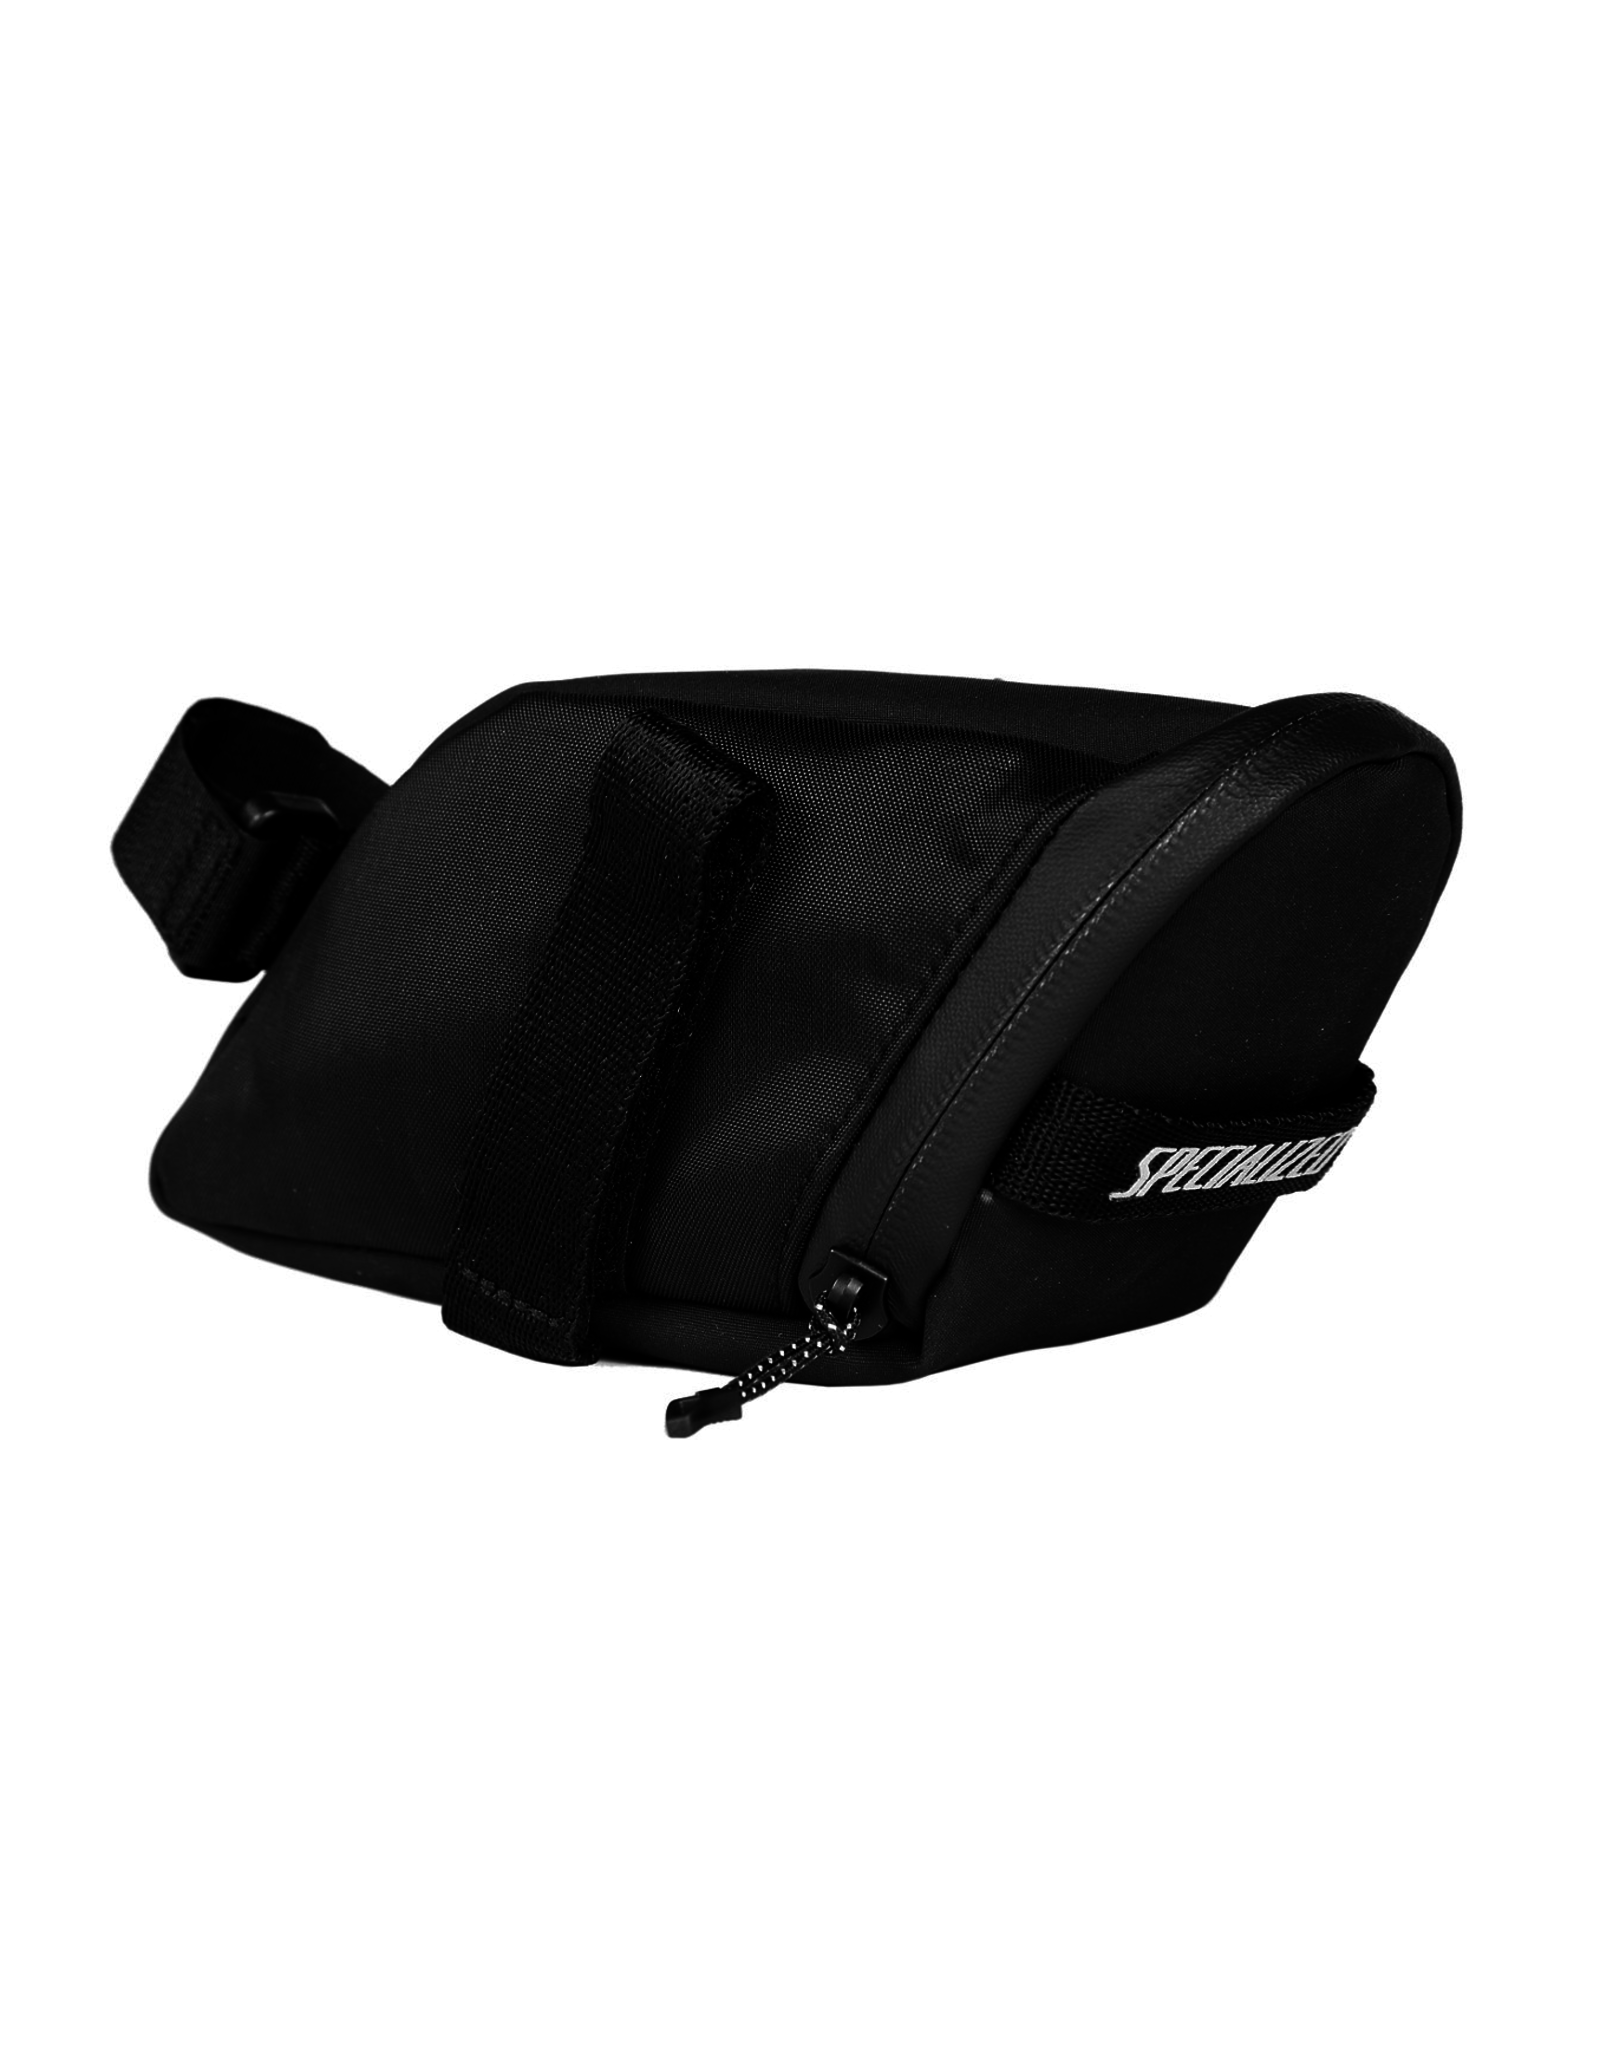 Specialized Mini Wedgie Seat Bag - Black - Cycle Solutions